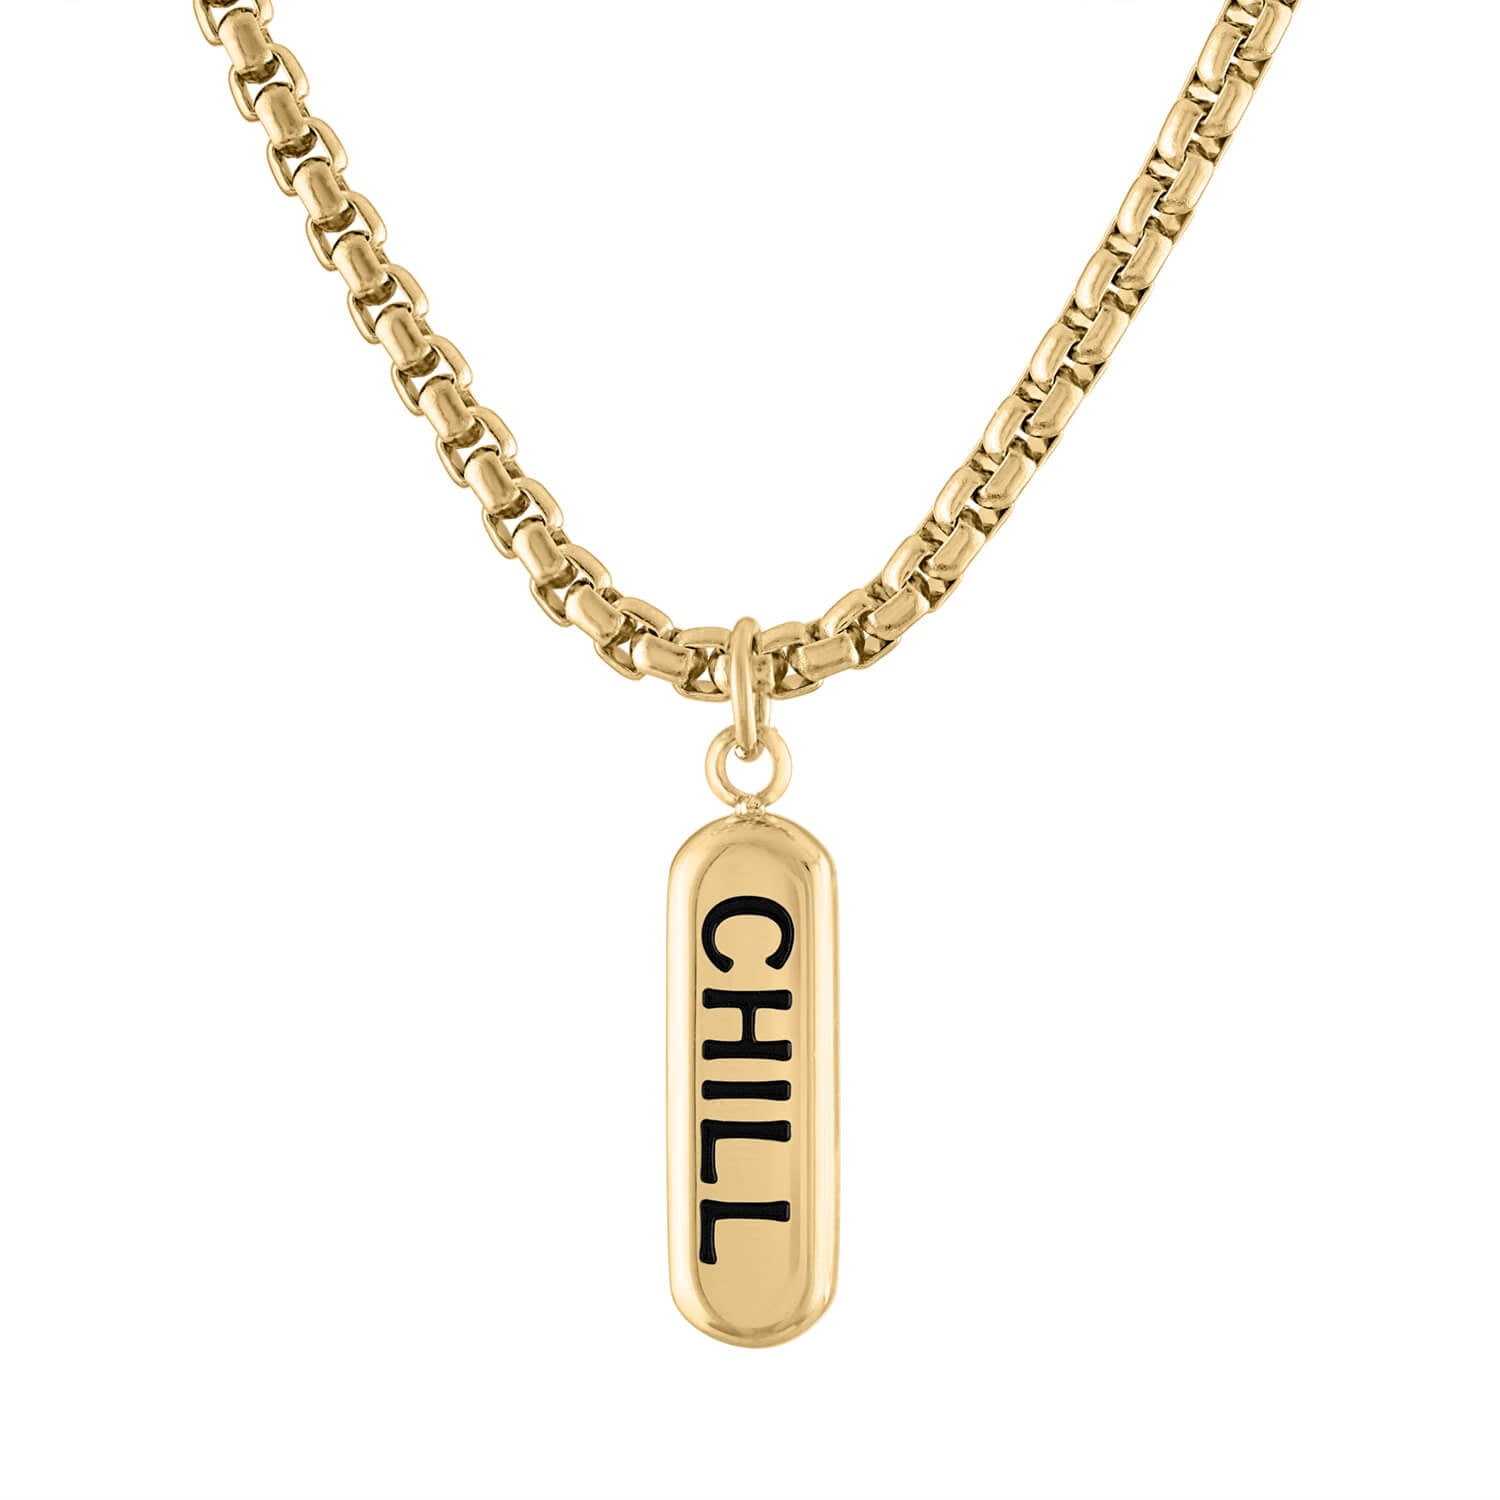 Chill Pill Necklace in Gold